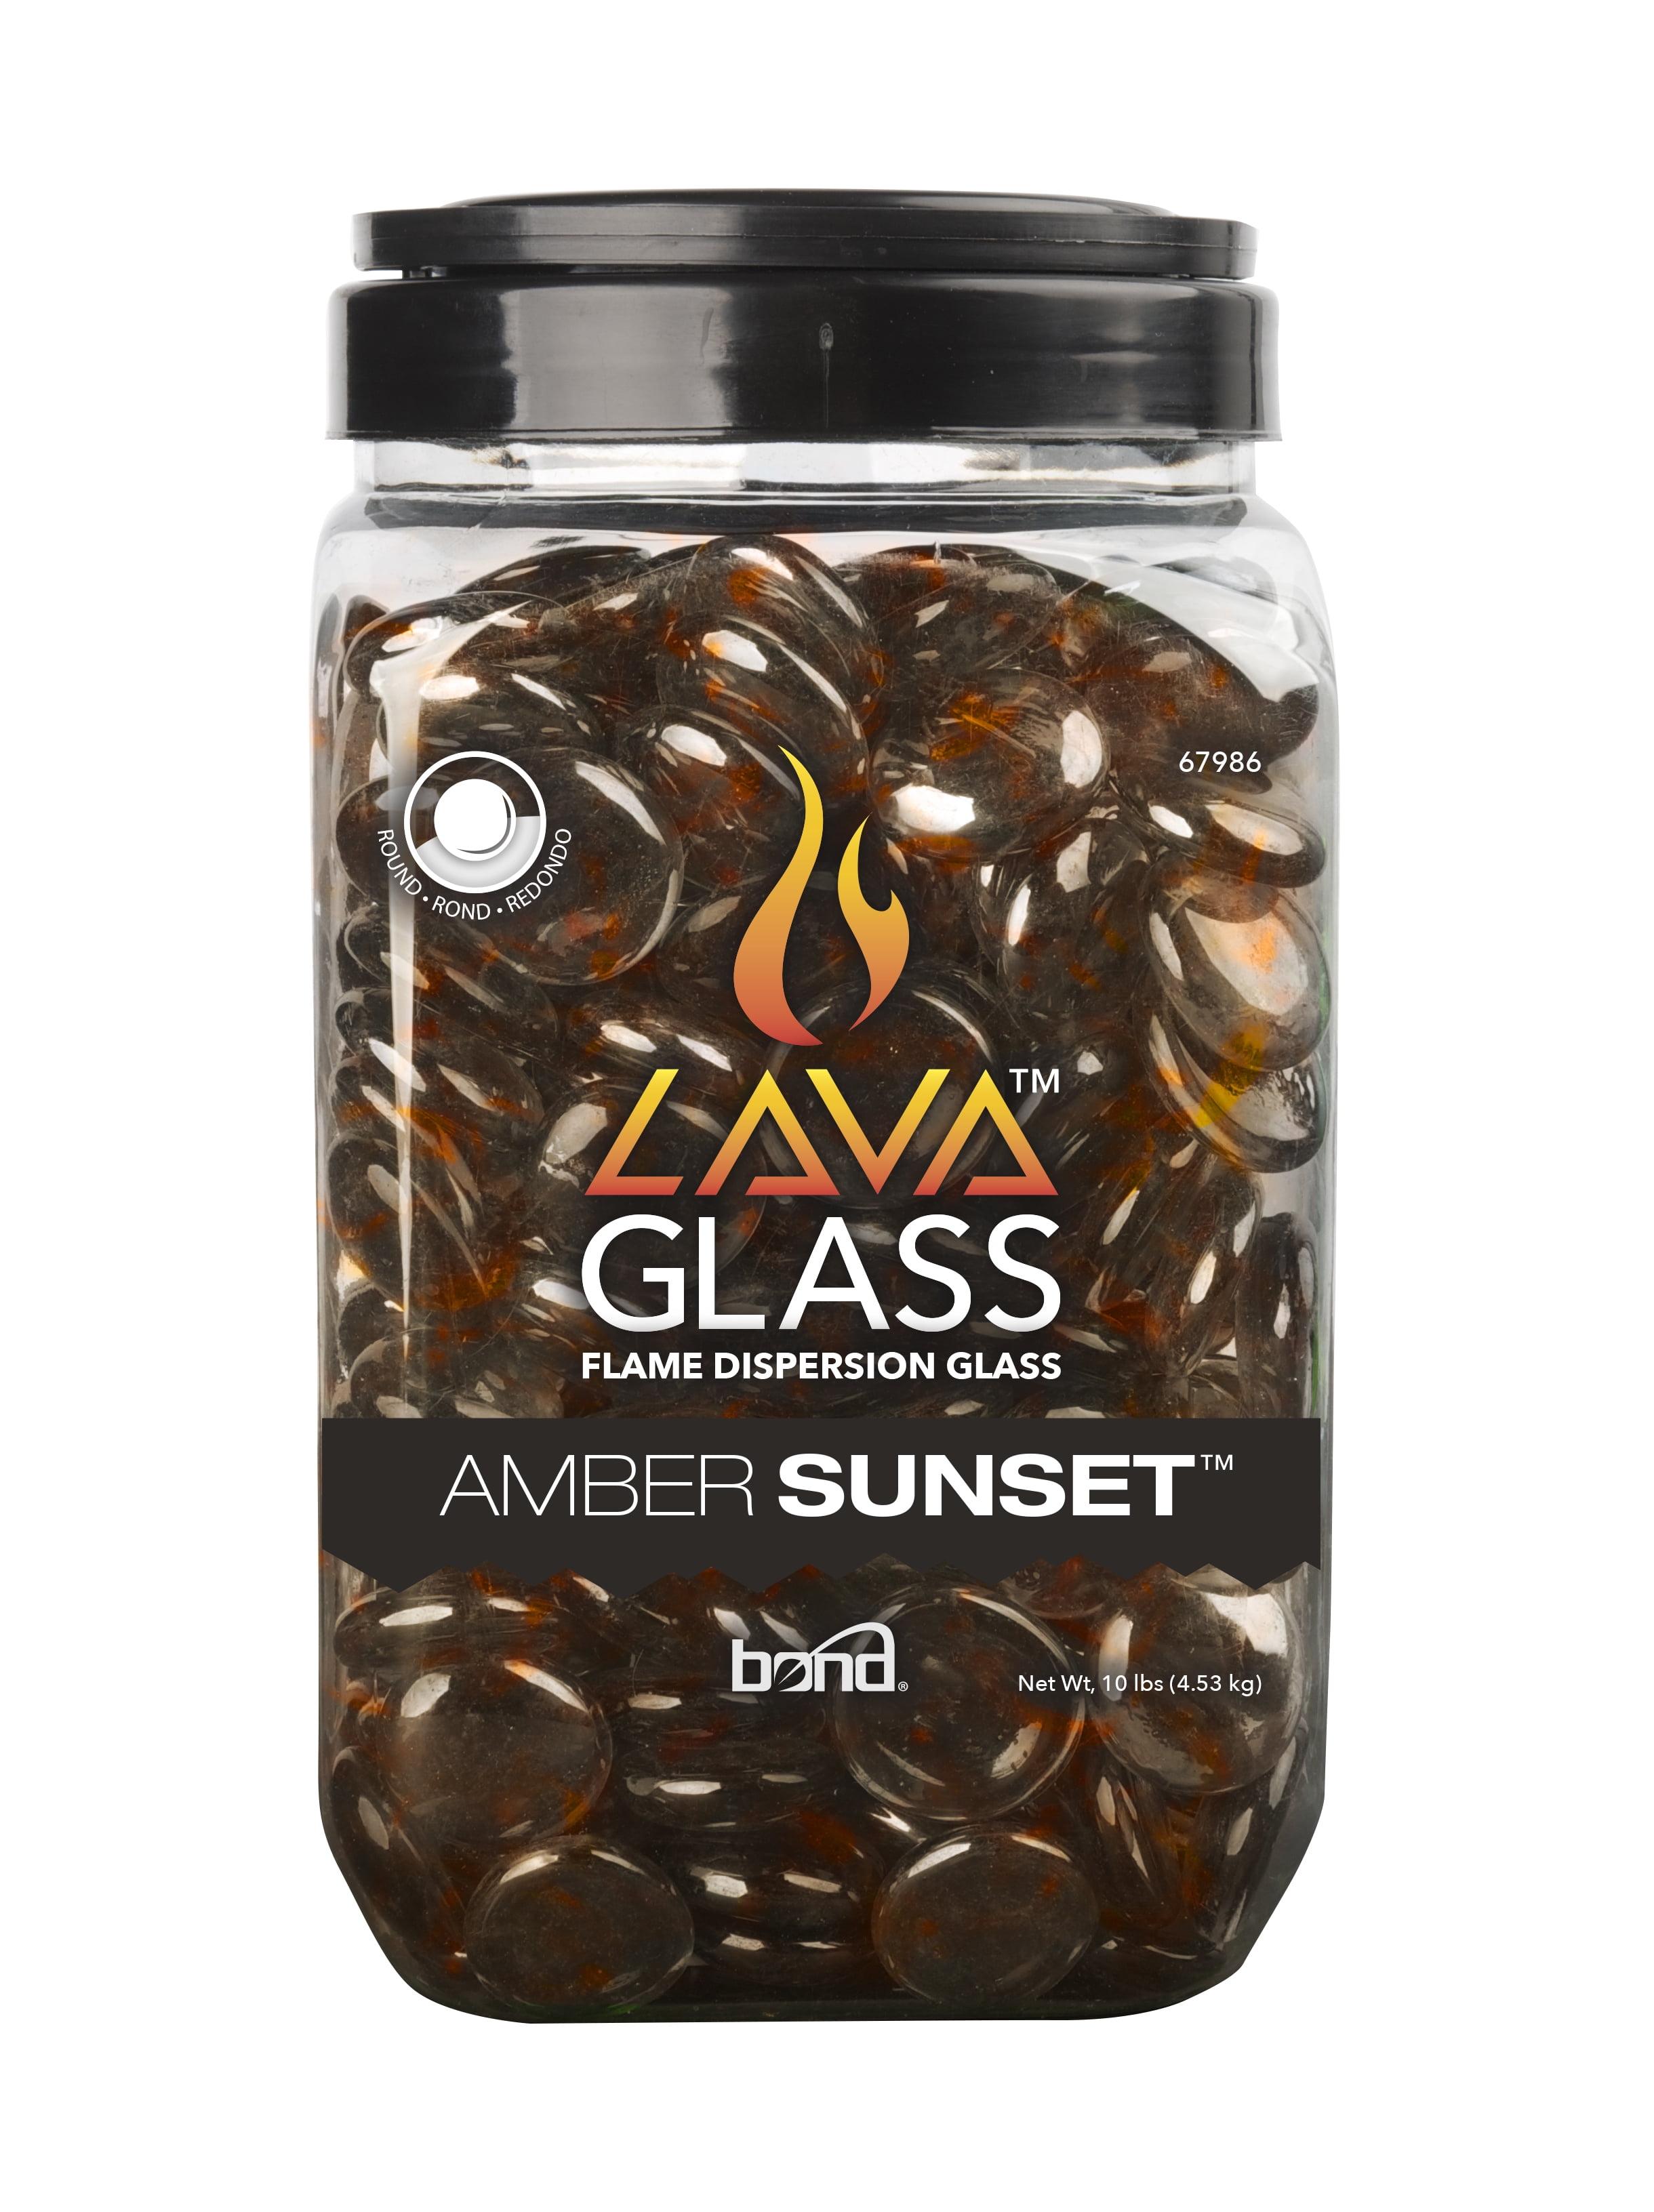 Luxurious Amber Sunset Lava Glass for Indoor and Outdoor Fire Pits, 10 Lb Jar